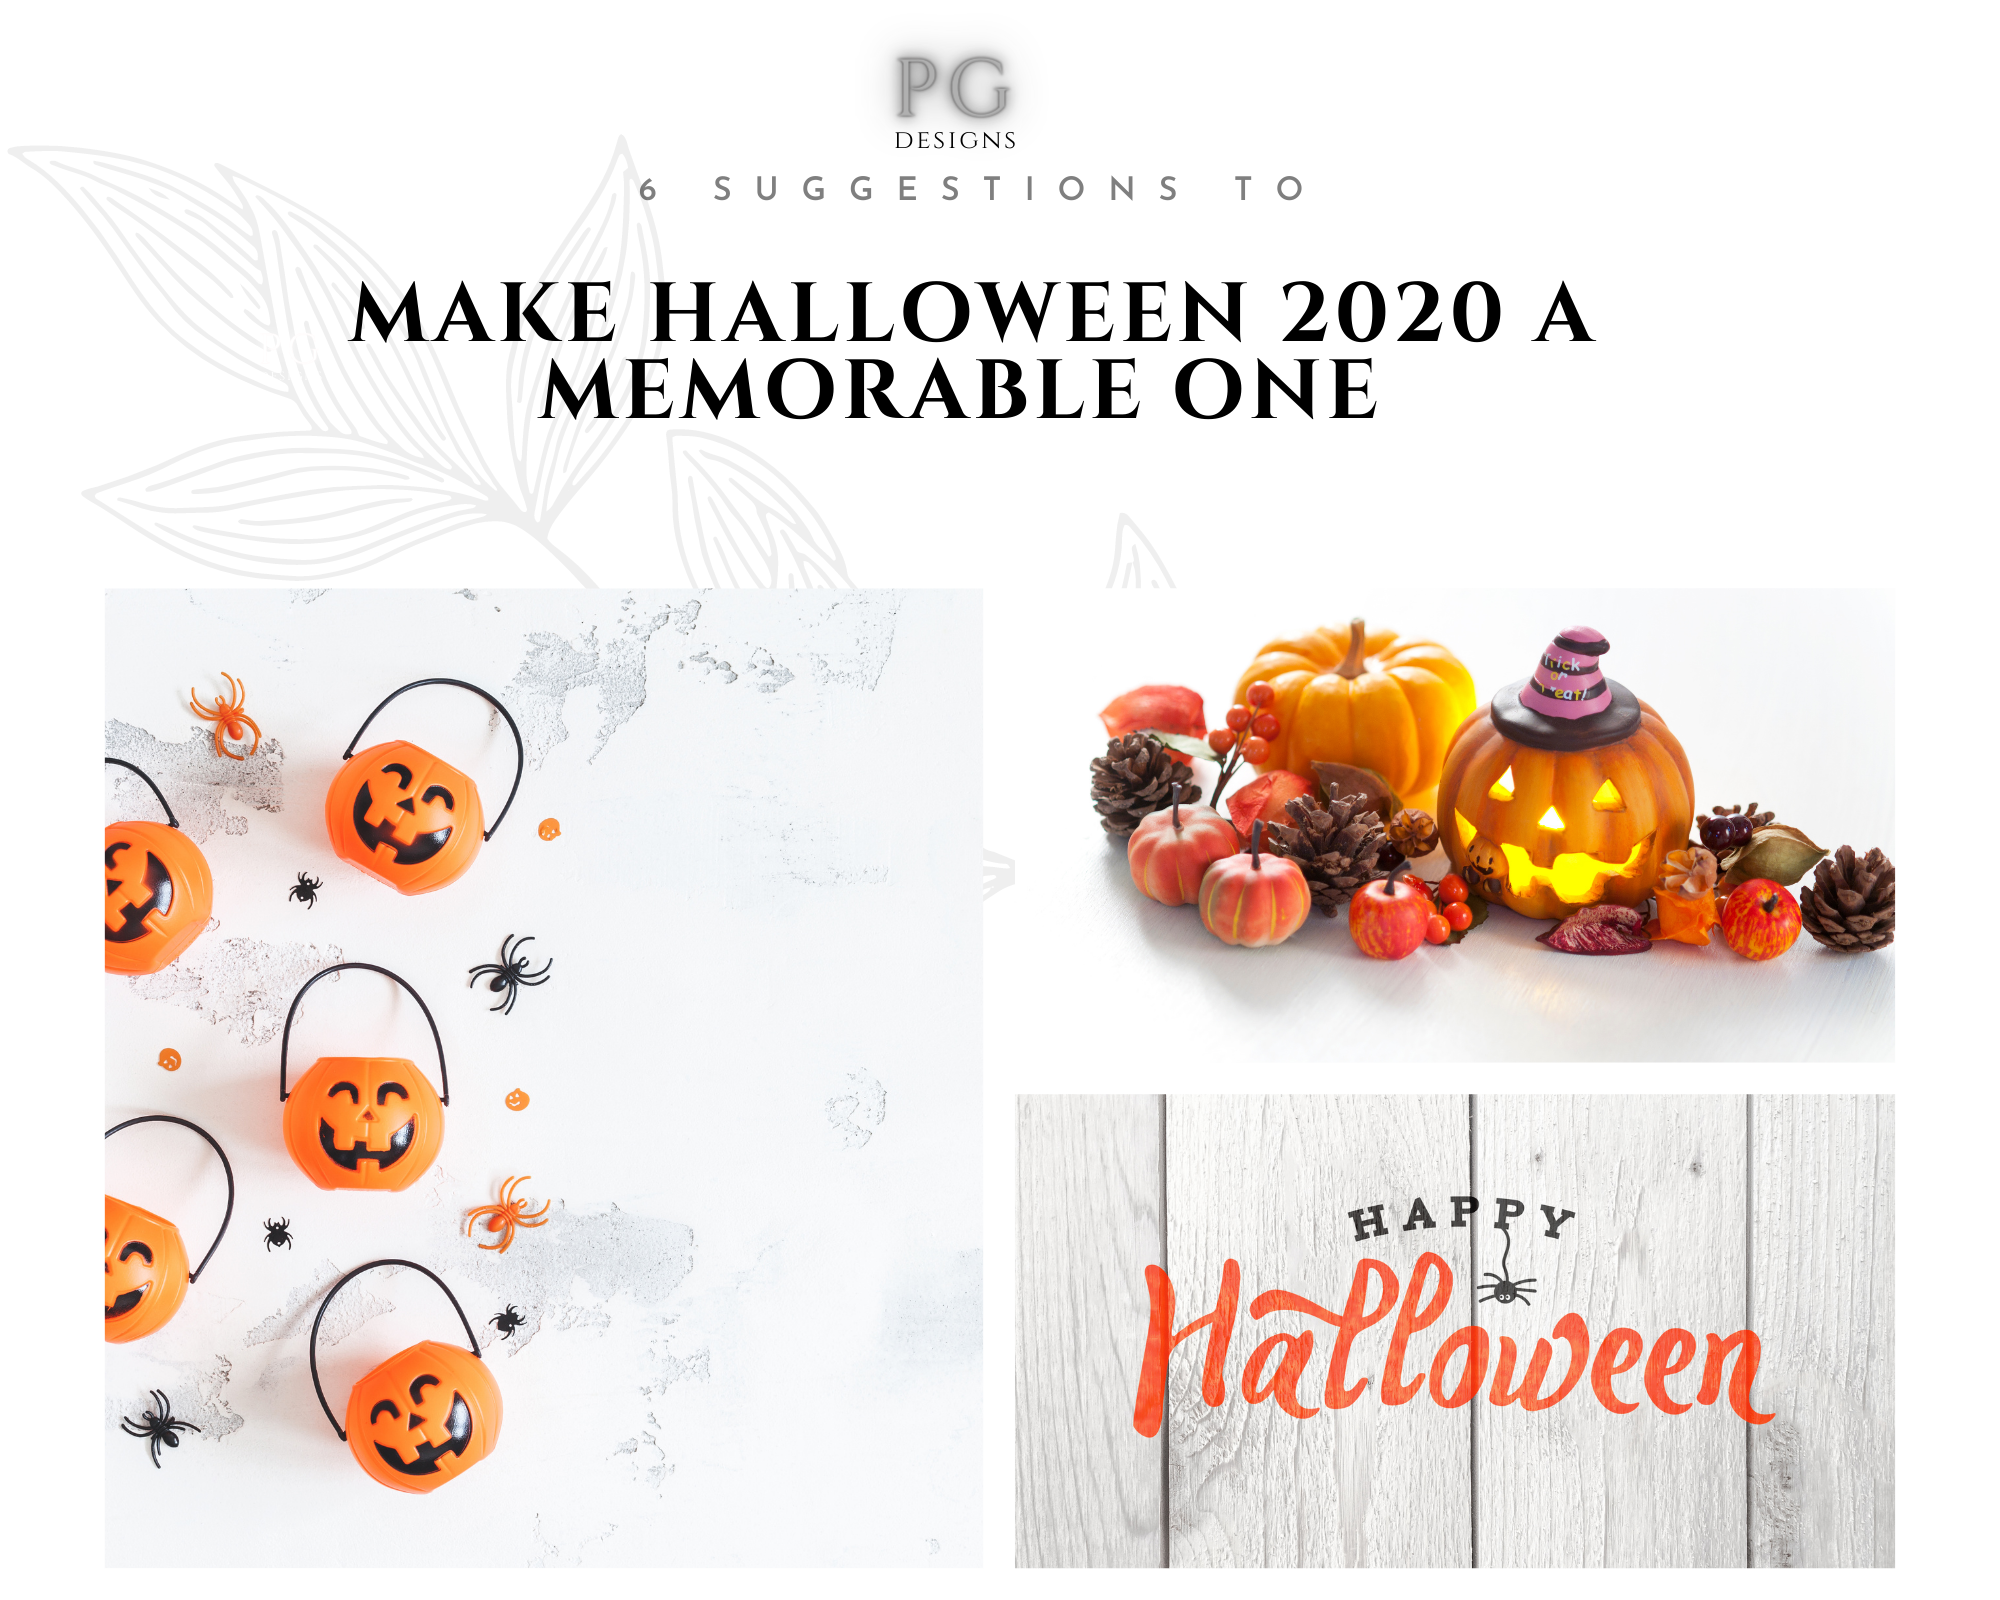 6 Suggestions to make Halloween 2020 a memorable one